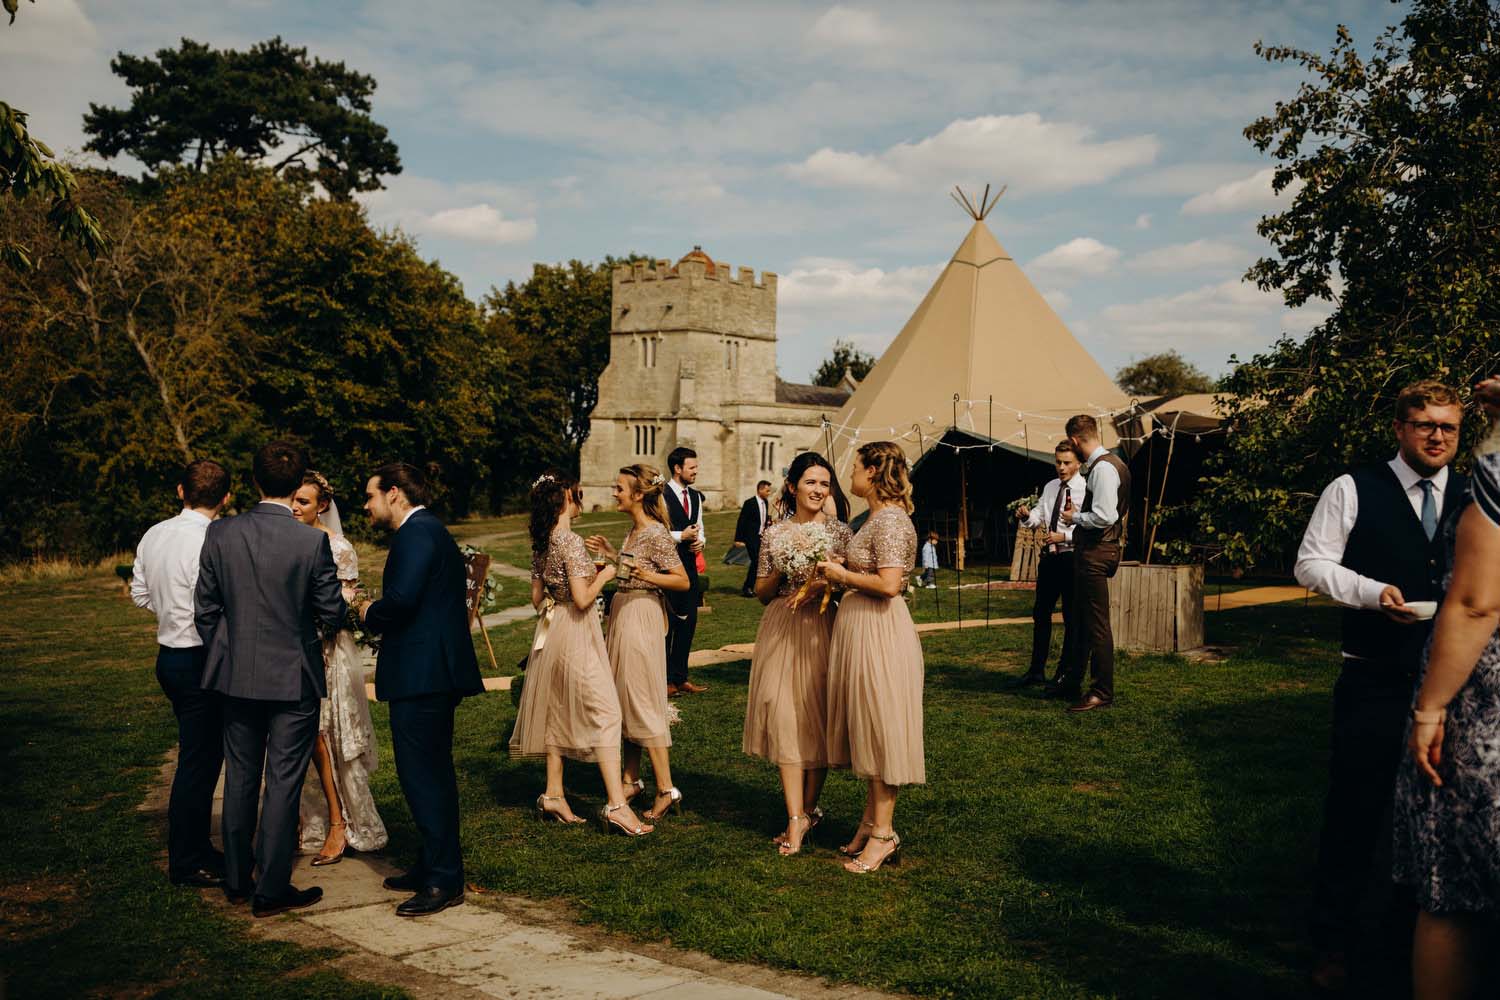 guests mingled at wedding with tipi in background